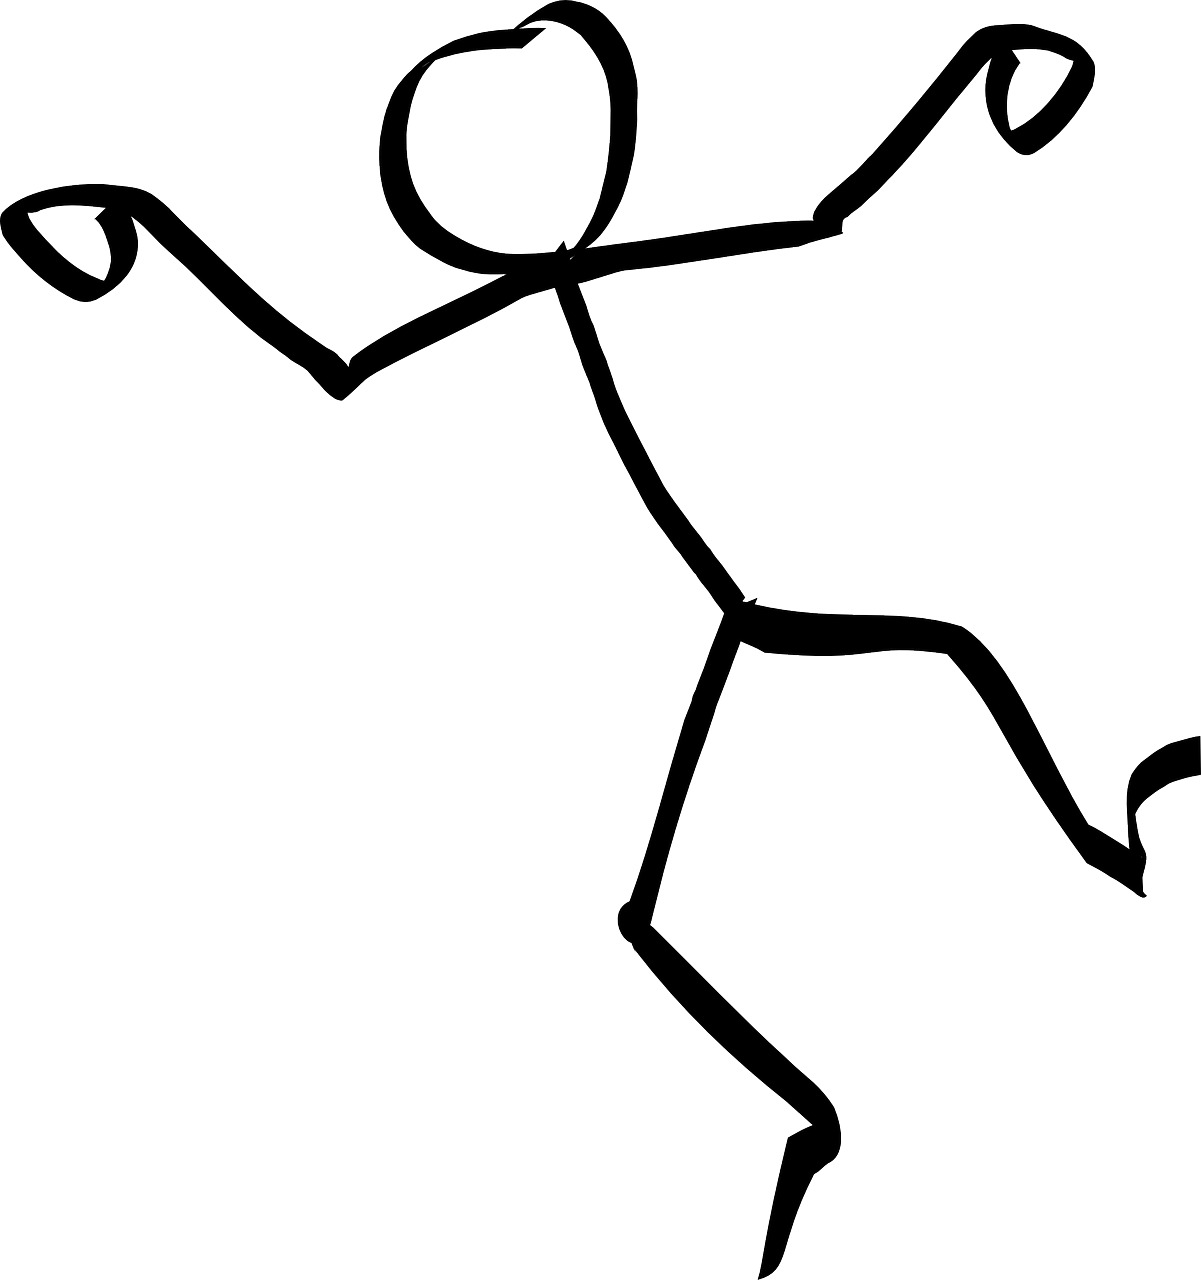 Dancing Stick Figure icons